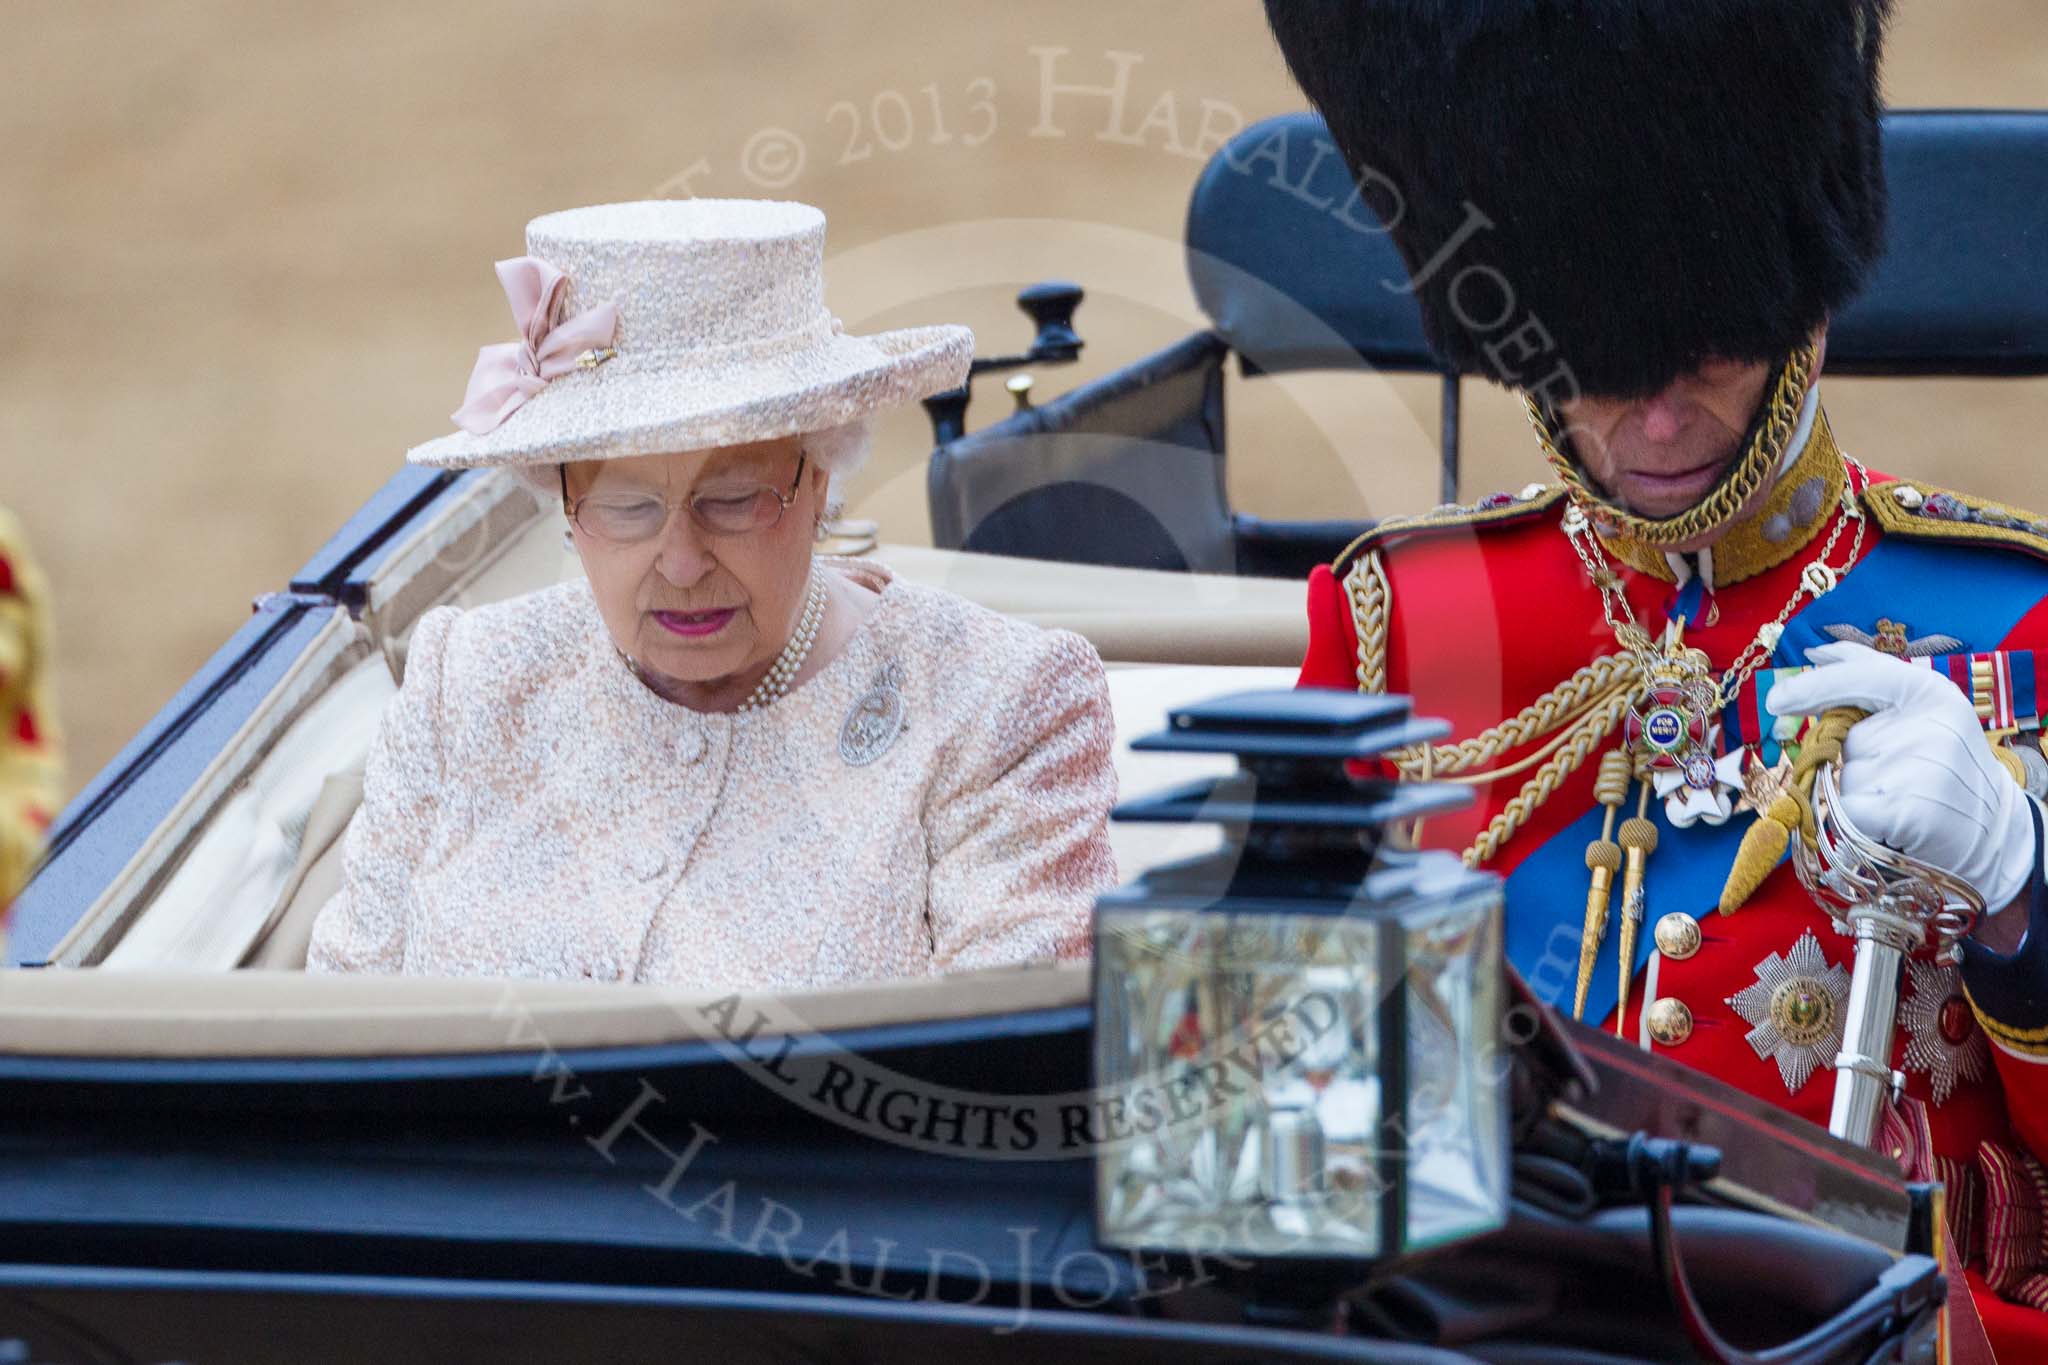 Trooping the Colour 2015. Image #647, 13 June 2015 12:08 Horse Guards Parade, London, UK